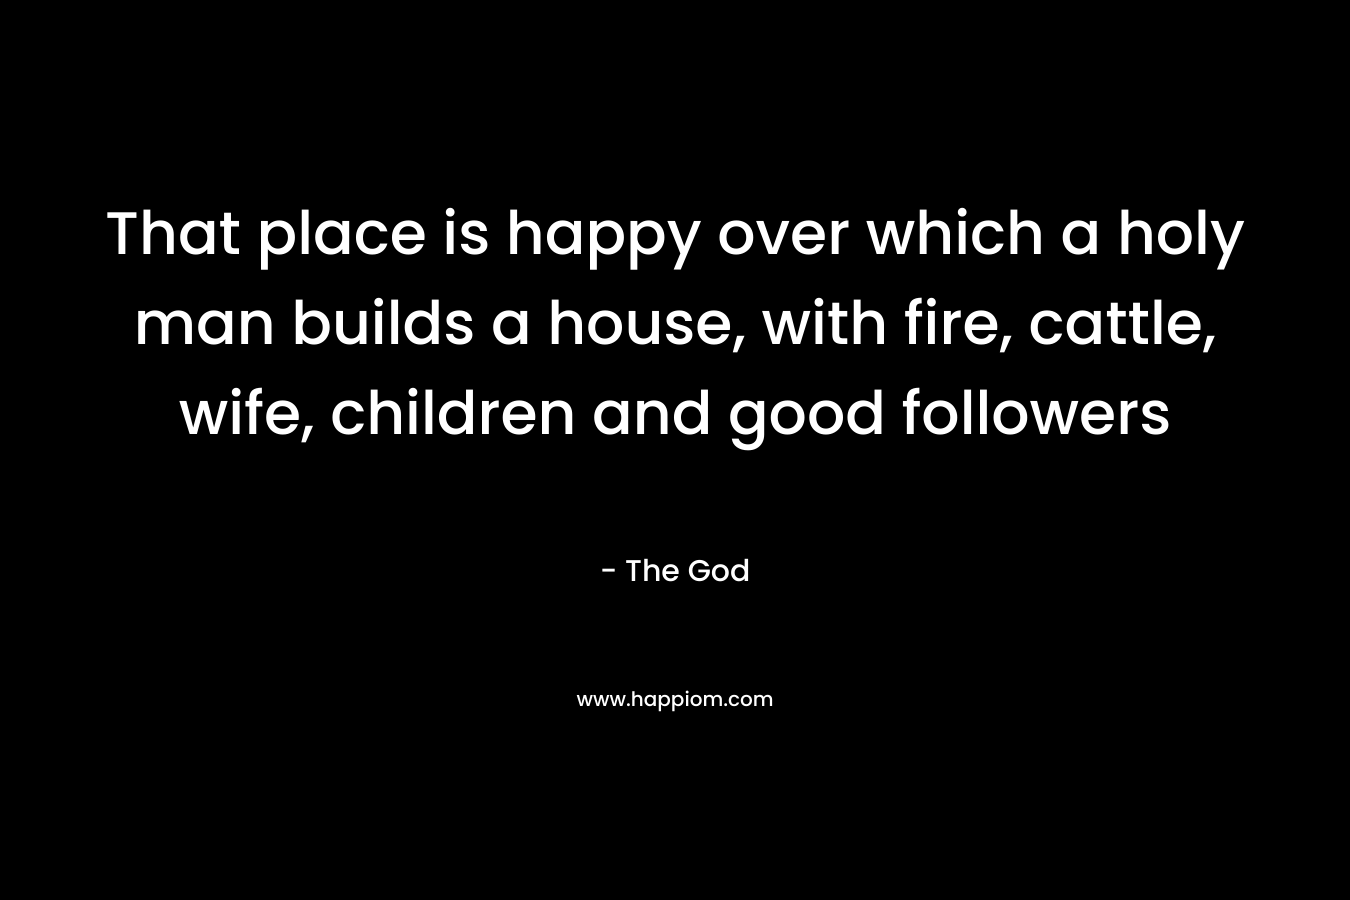 That place is happy over which a holy man builds a house, with fire, cattle, wife, children and good followers